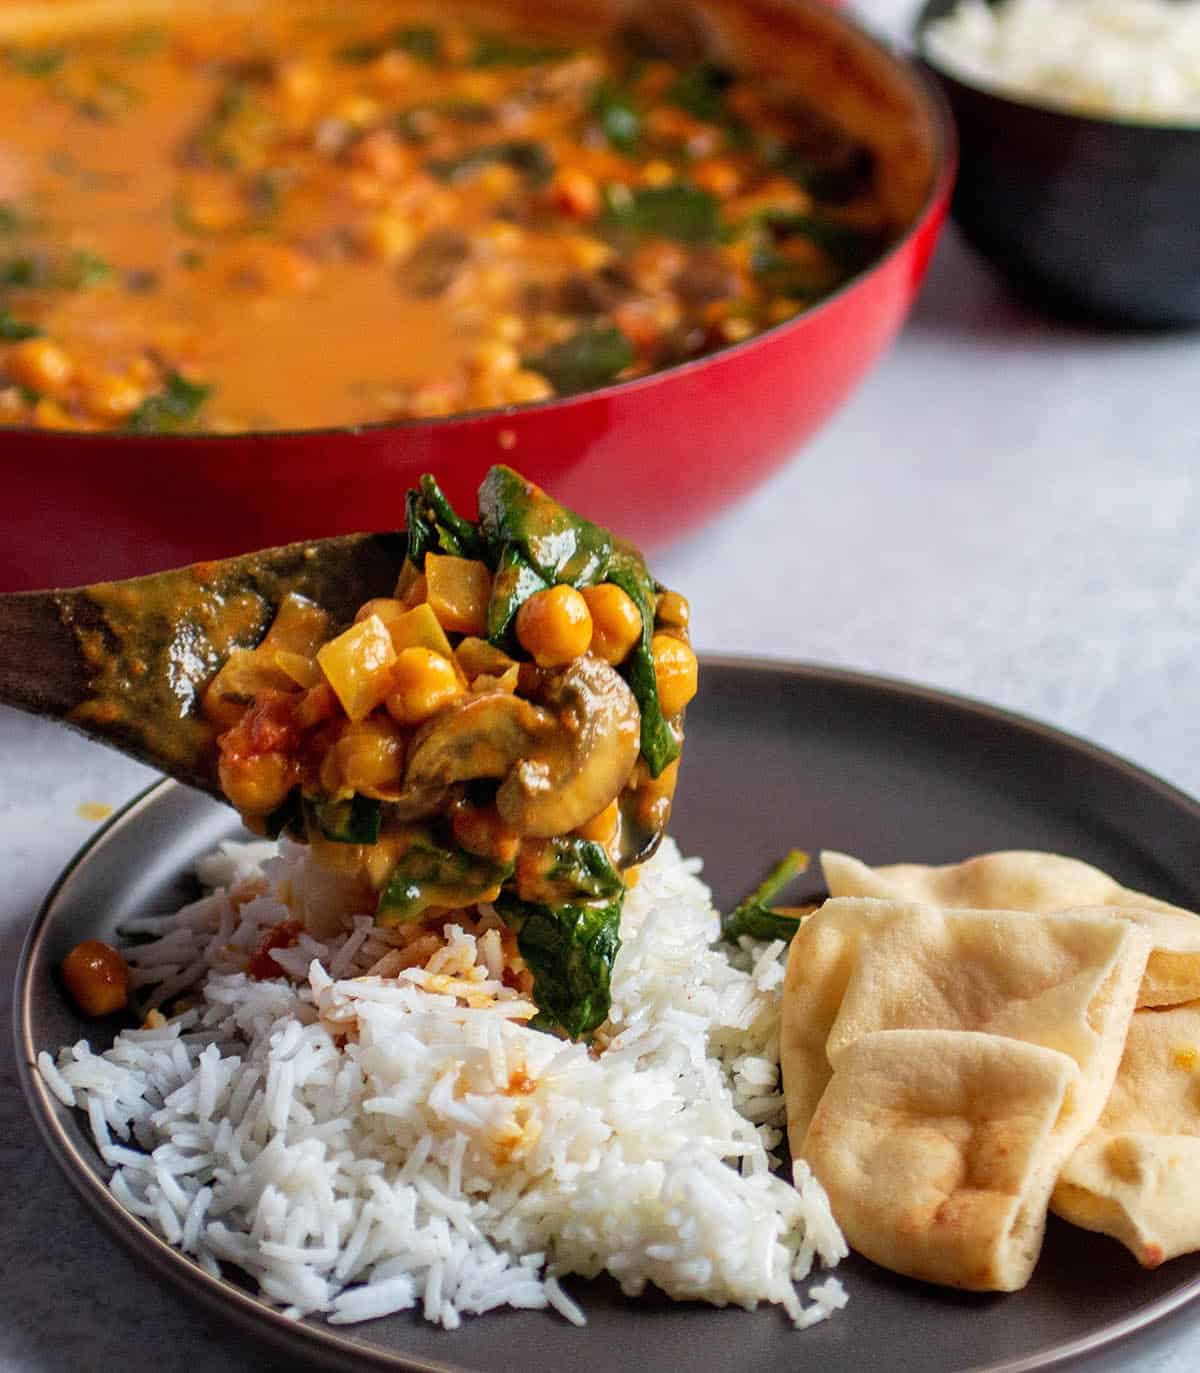 Plate with rice and naan. A wooden spoon pouring on a chickpea, spinach curry mix. 